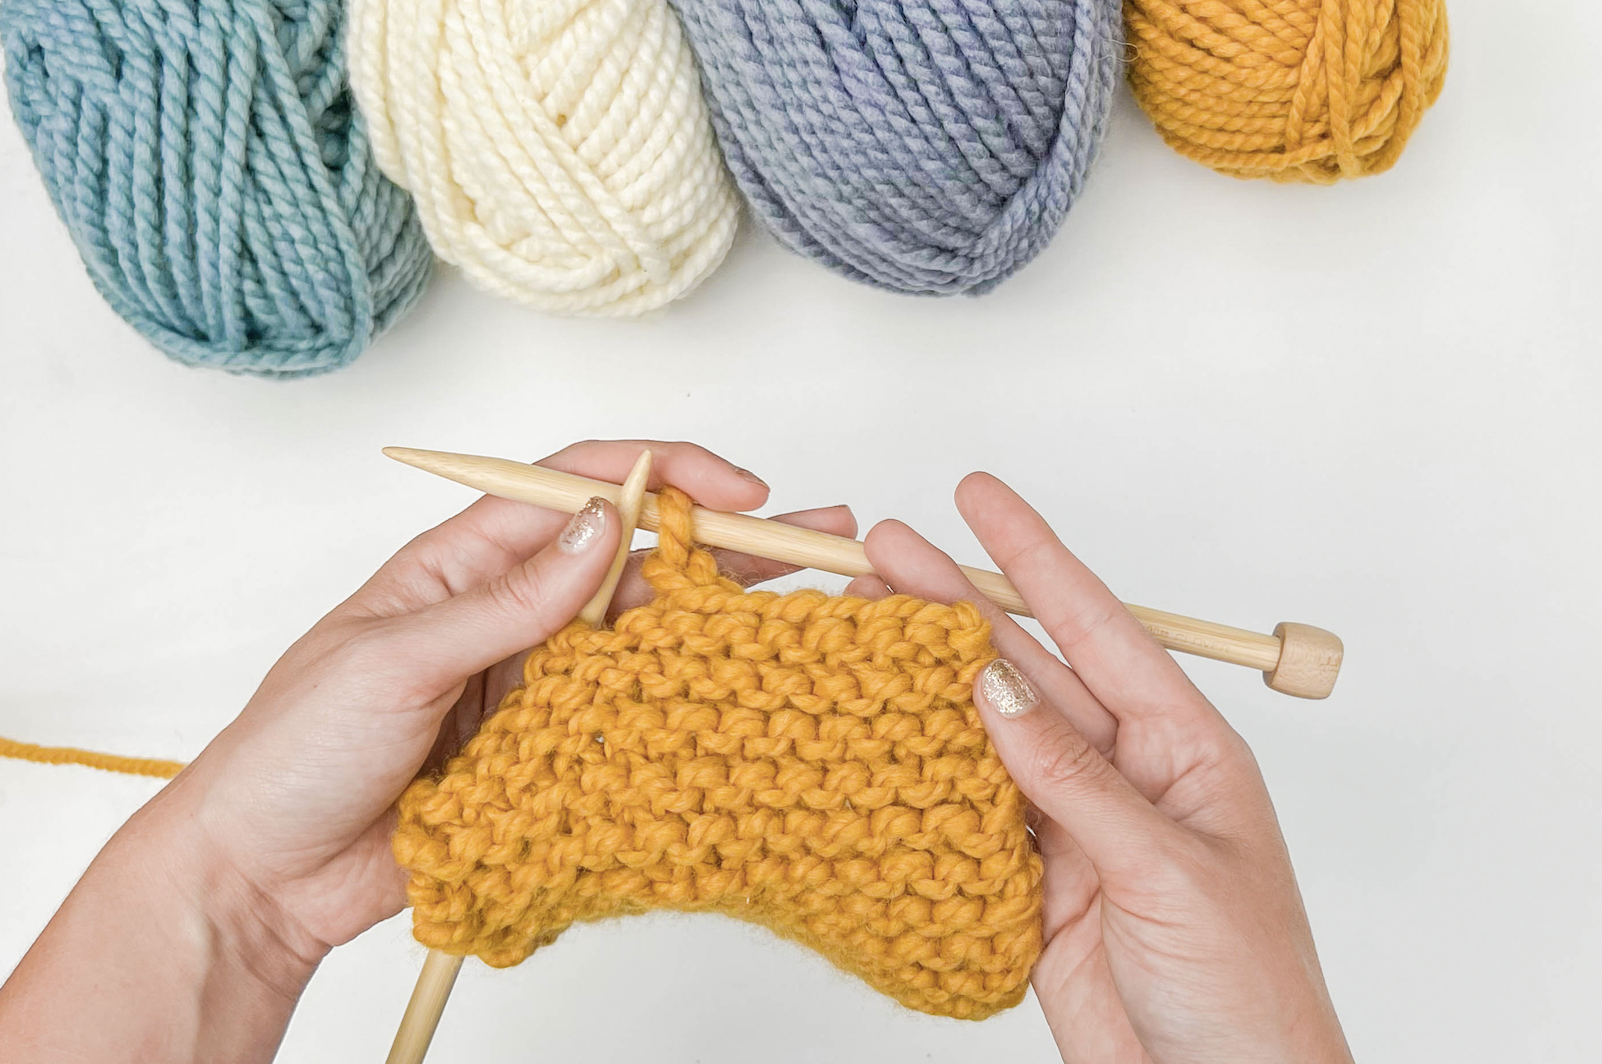 How to Bind Off Knitting [6 Great Ways]